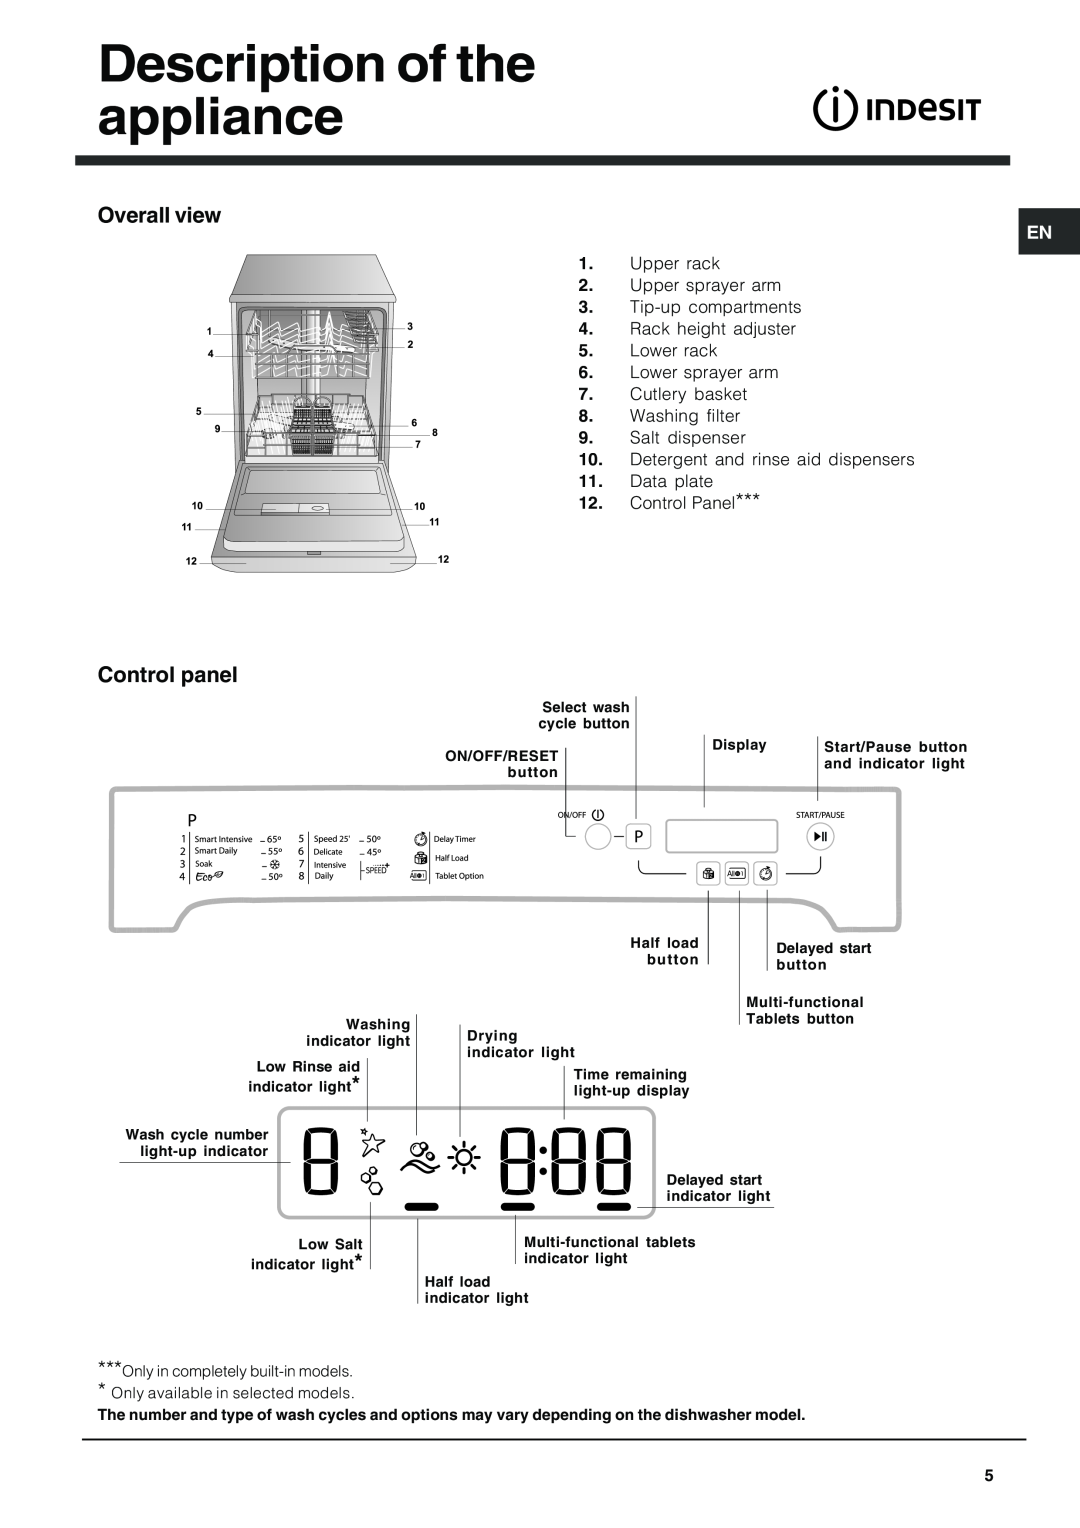 Indesit IDP-148 operating instructions Description of the appliance, Overall view, Control panel 